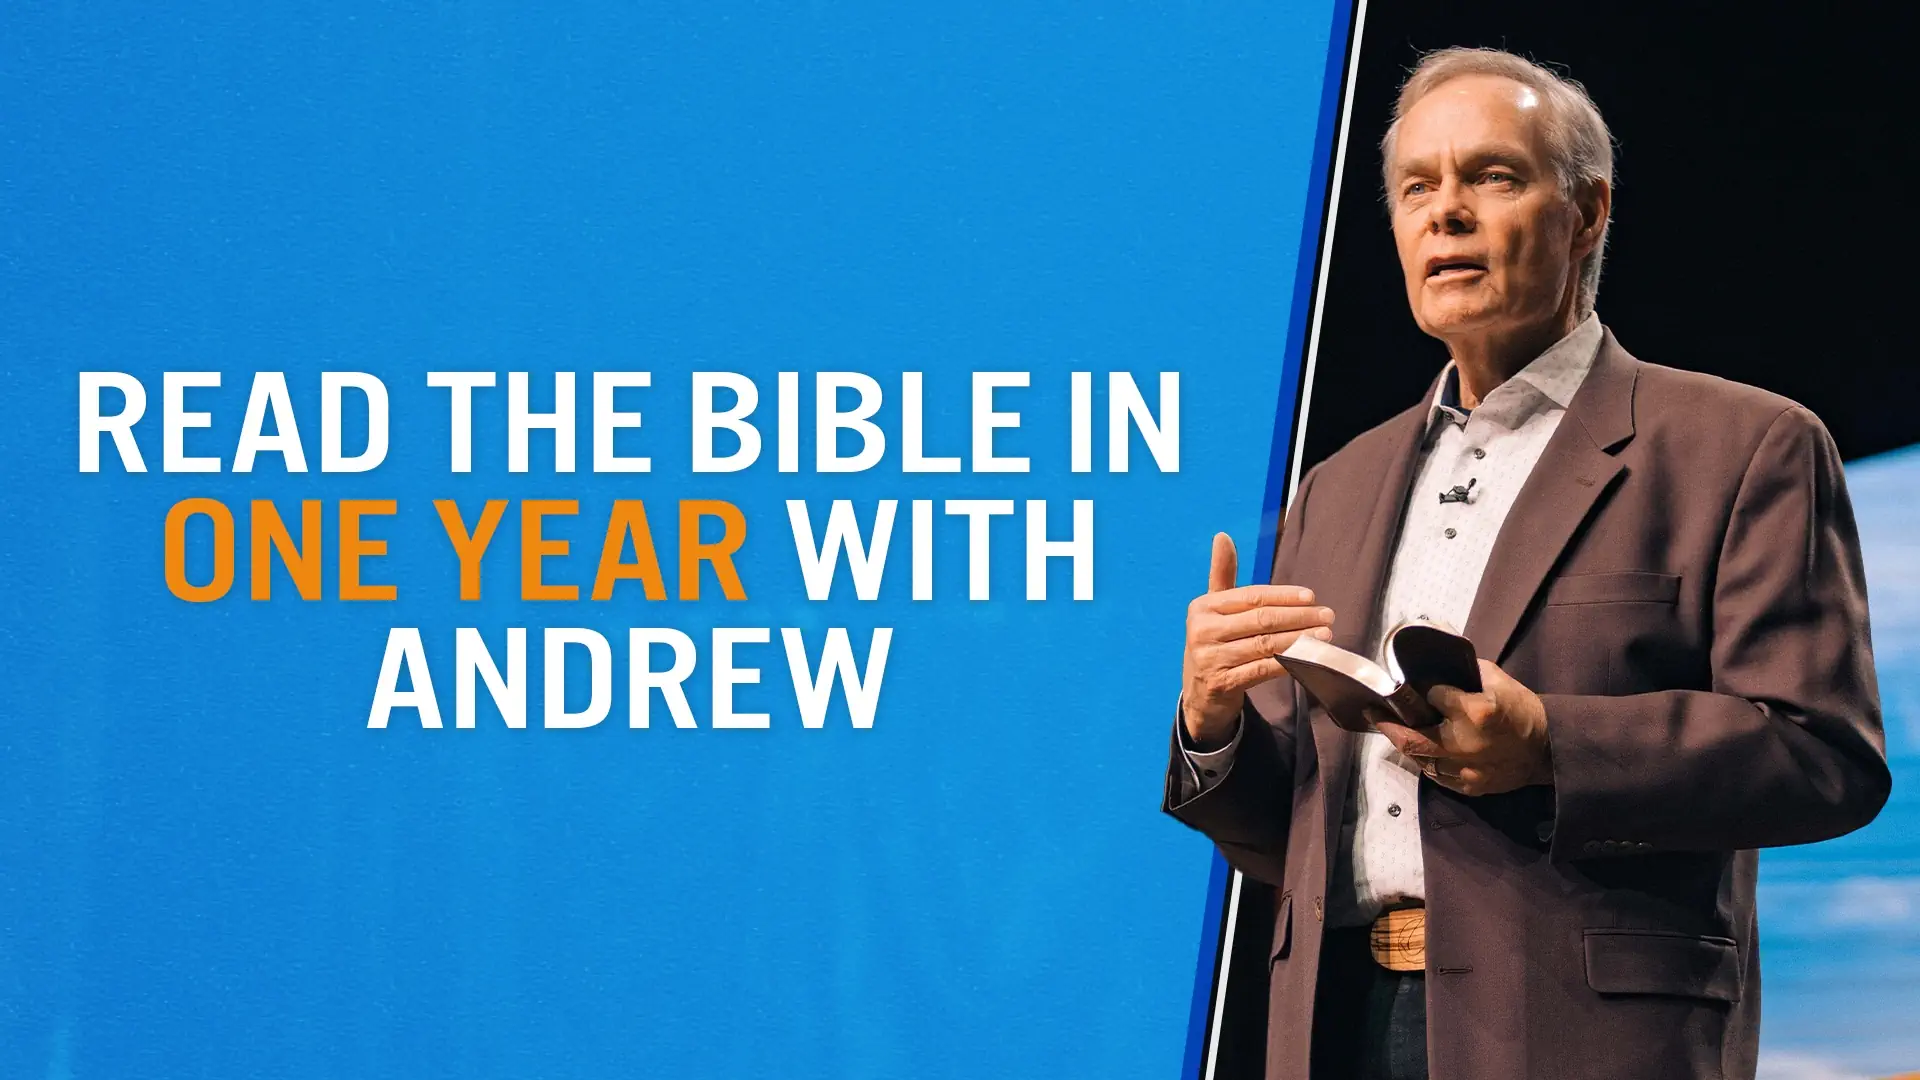 Andrew Wommack standing with bible in hand